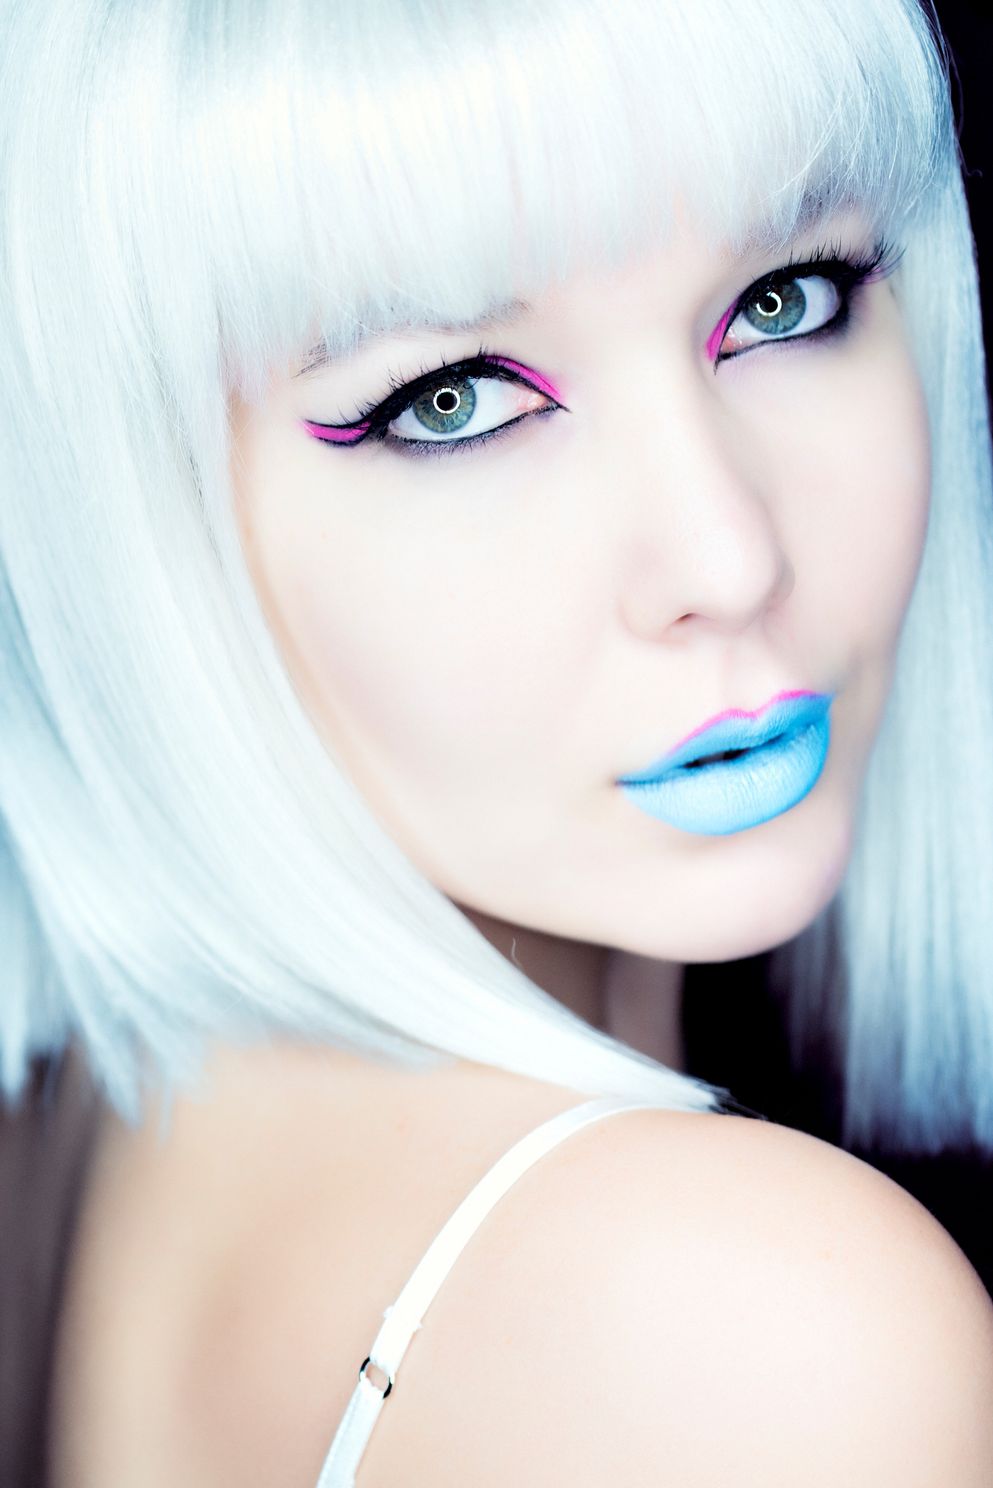 electrifying capture of a striking white-blond female in blue lipstick looking back over shoulder